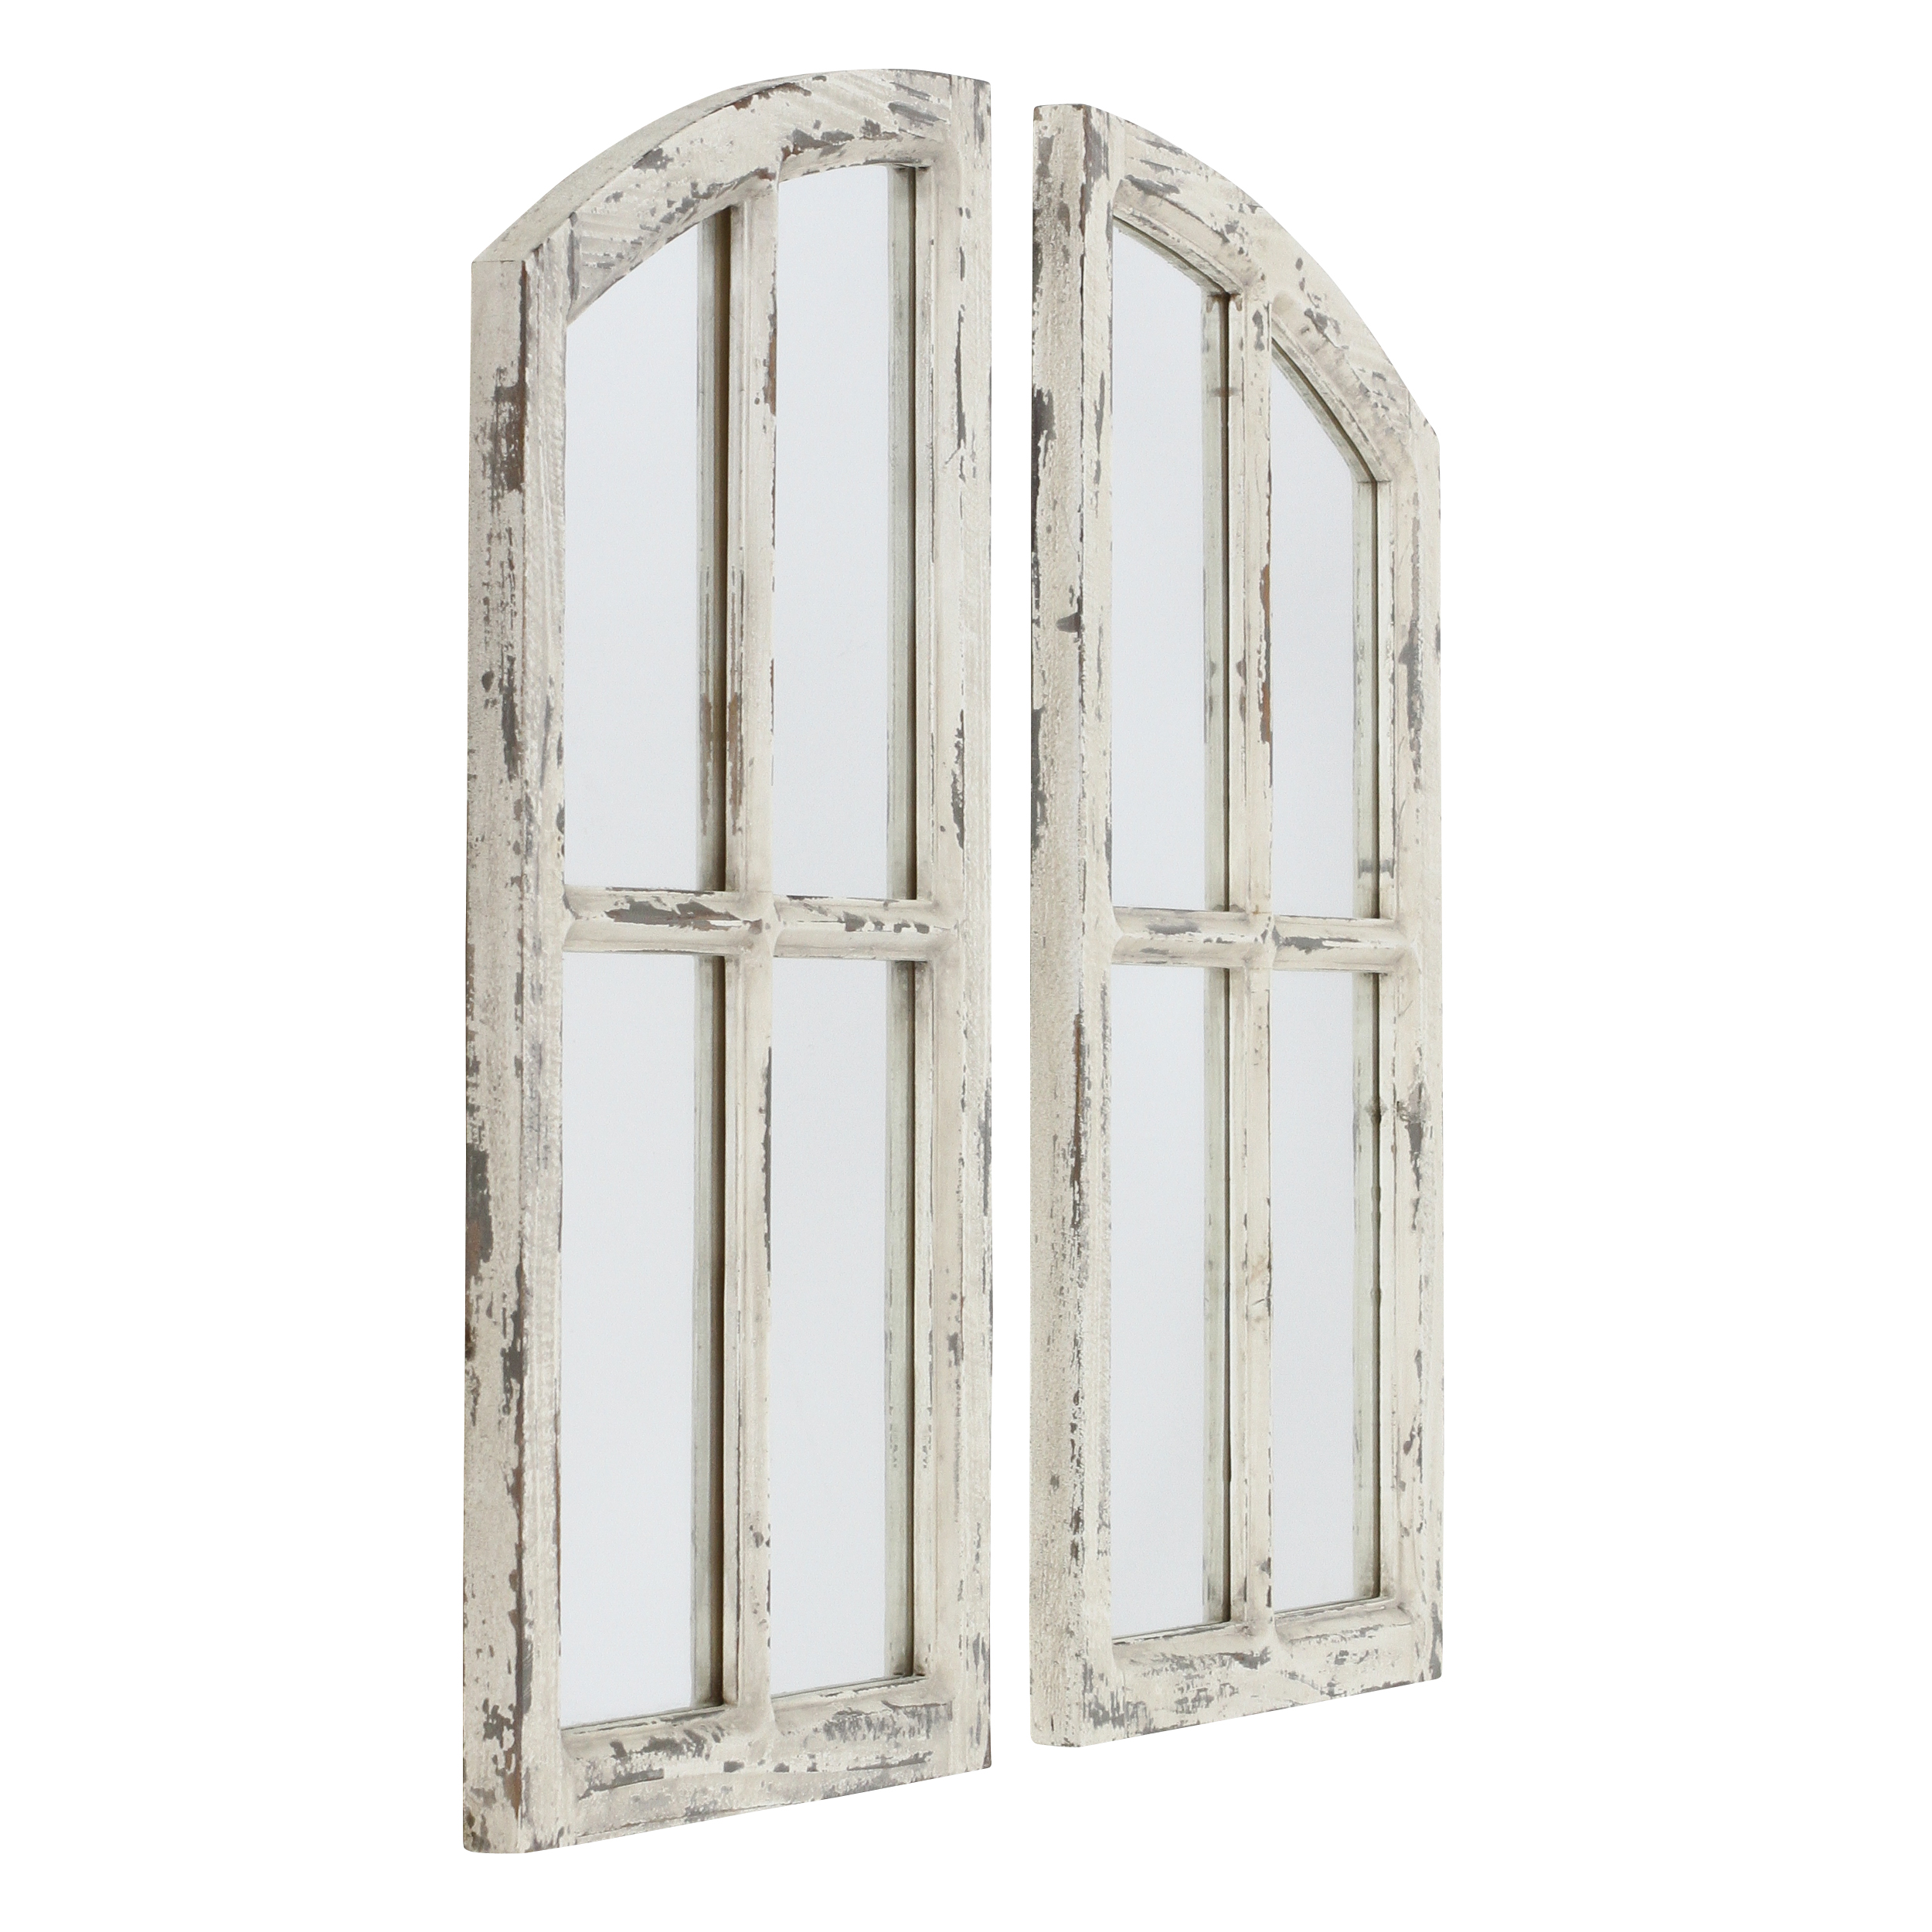 Jolene Arch Window Pane Mirrors Off-White 27" x 15" (Set of 2) by Aspire - image 3 of 6